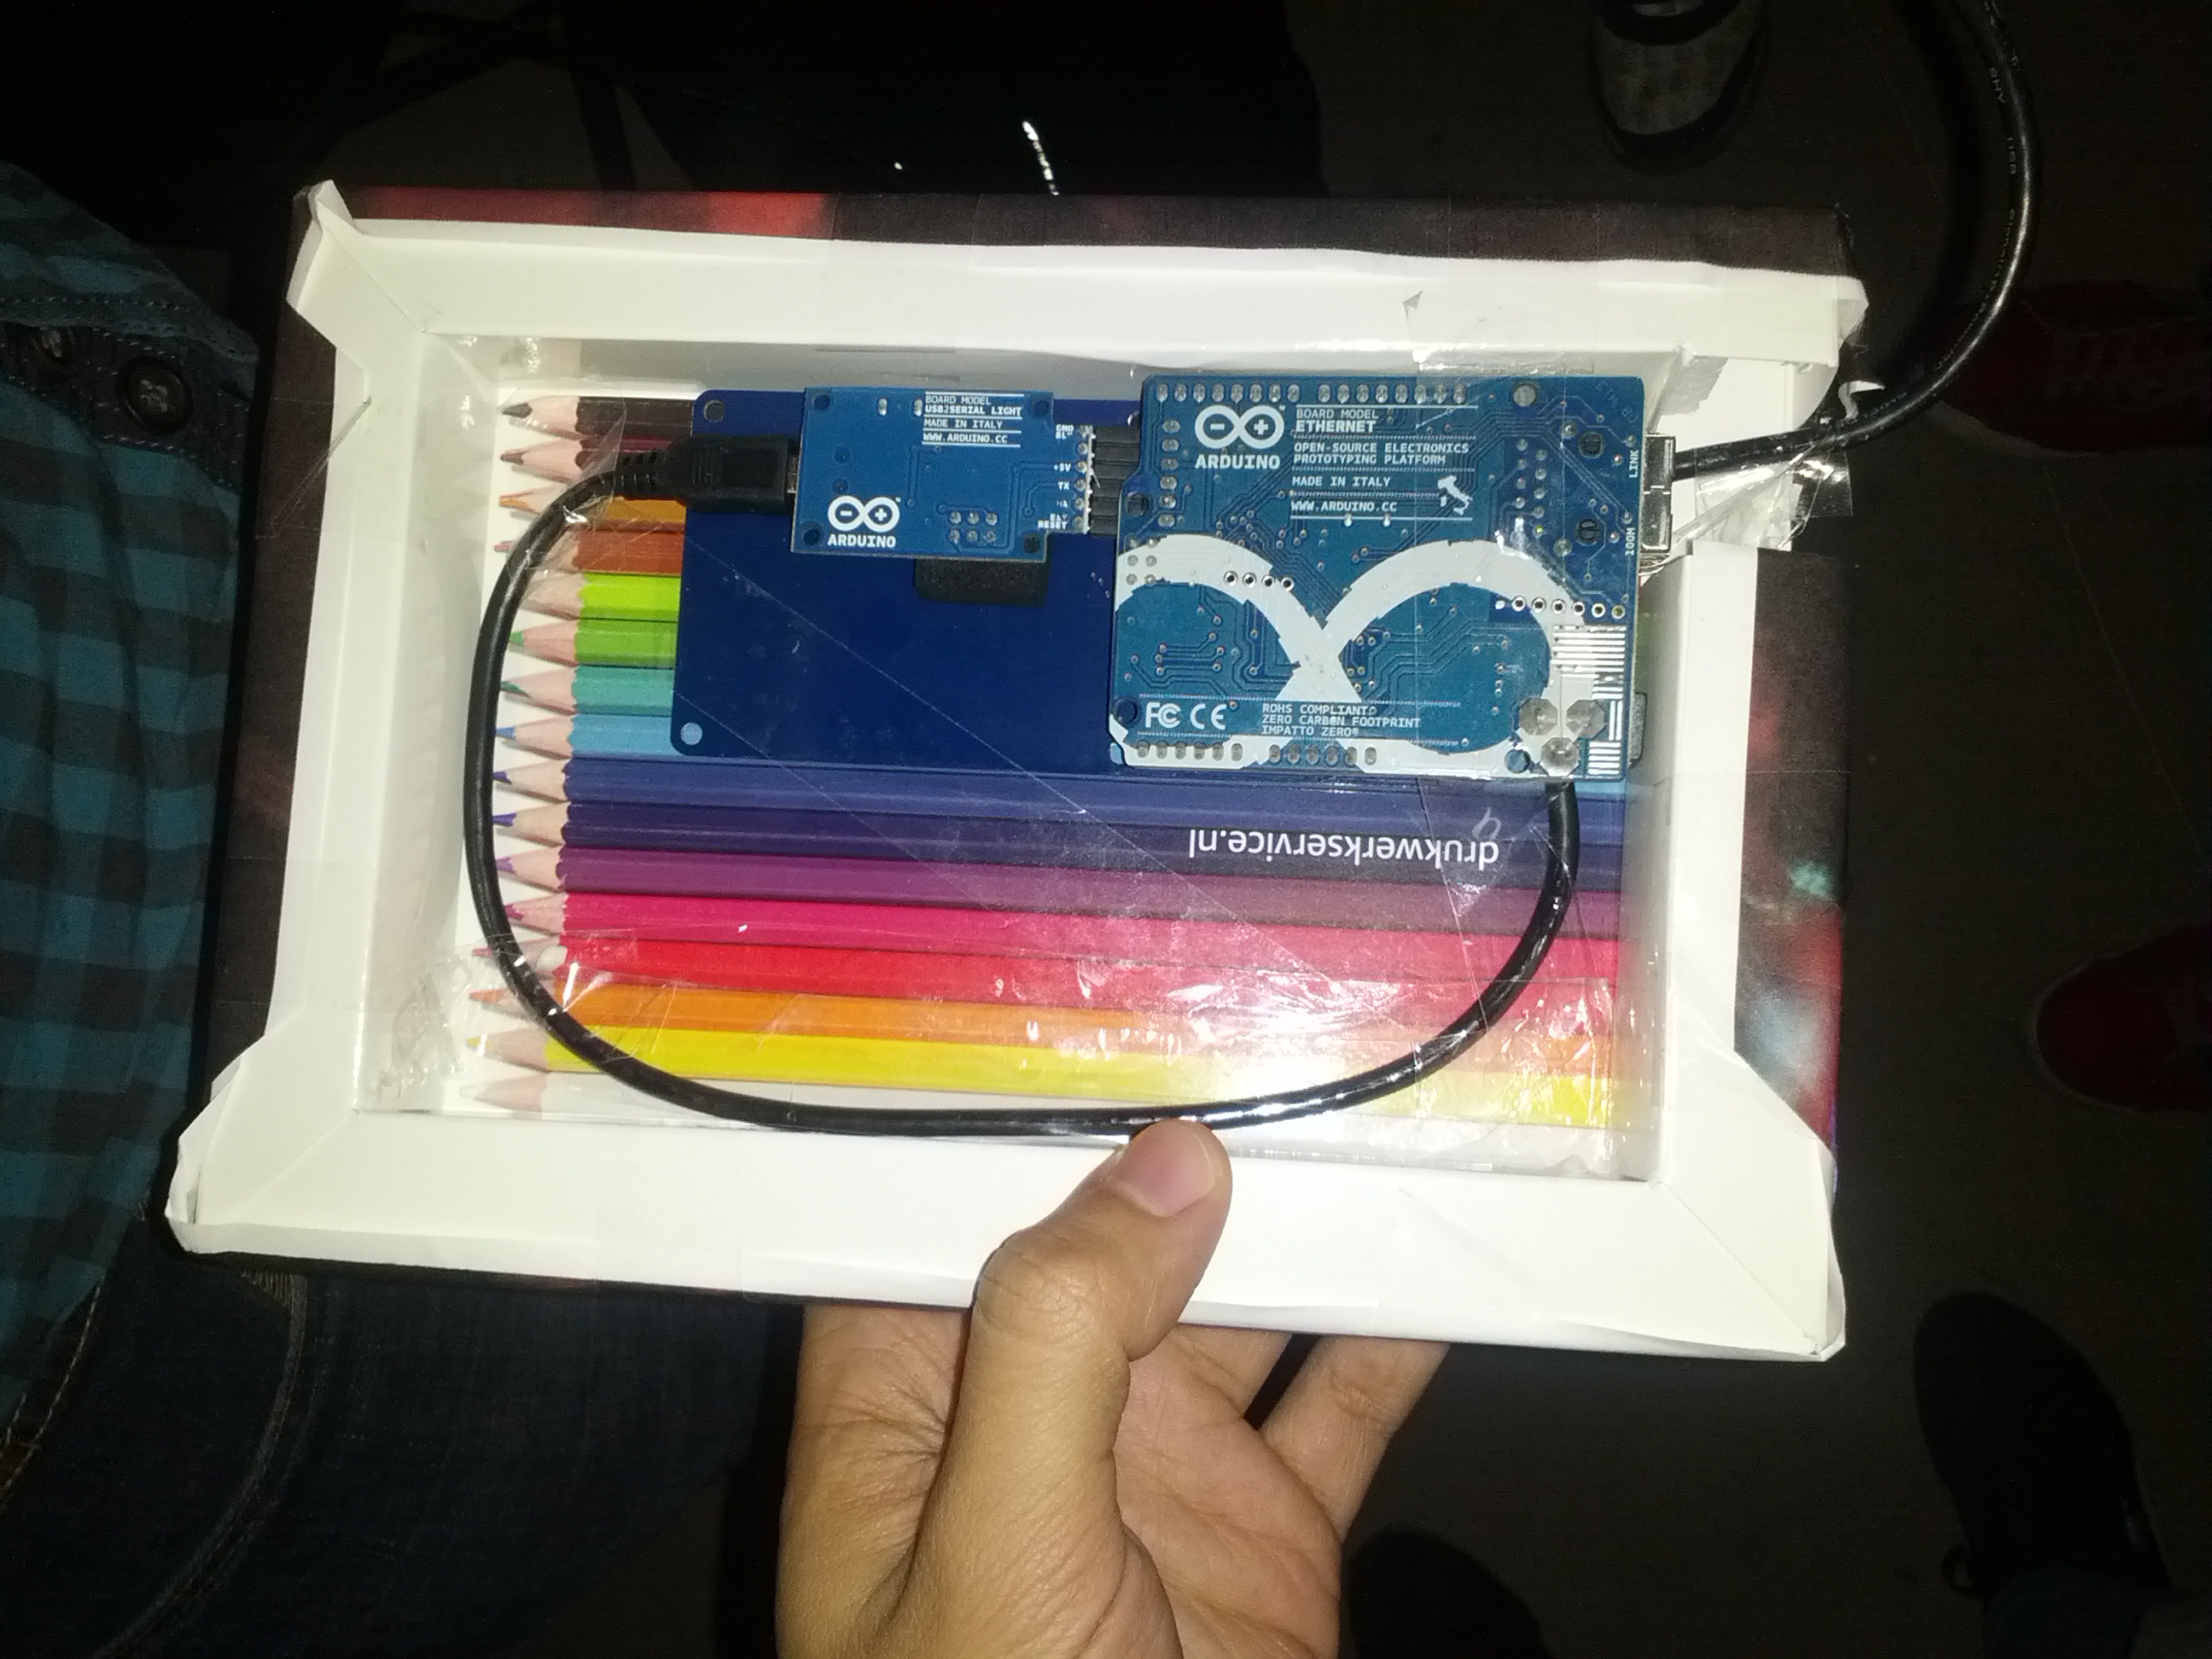 Hey, look, there is an Arduino in the box!